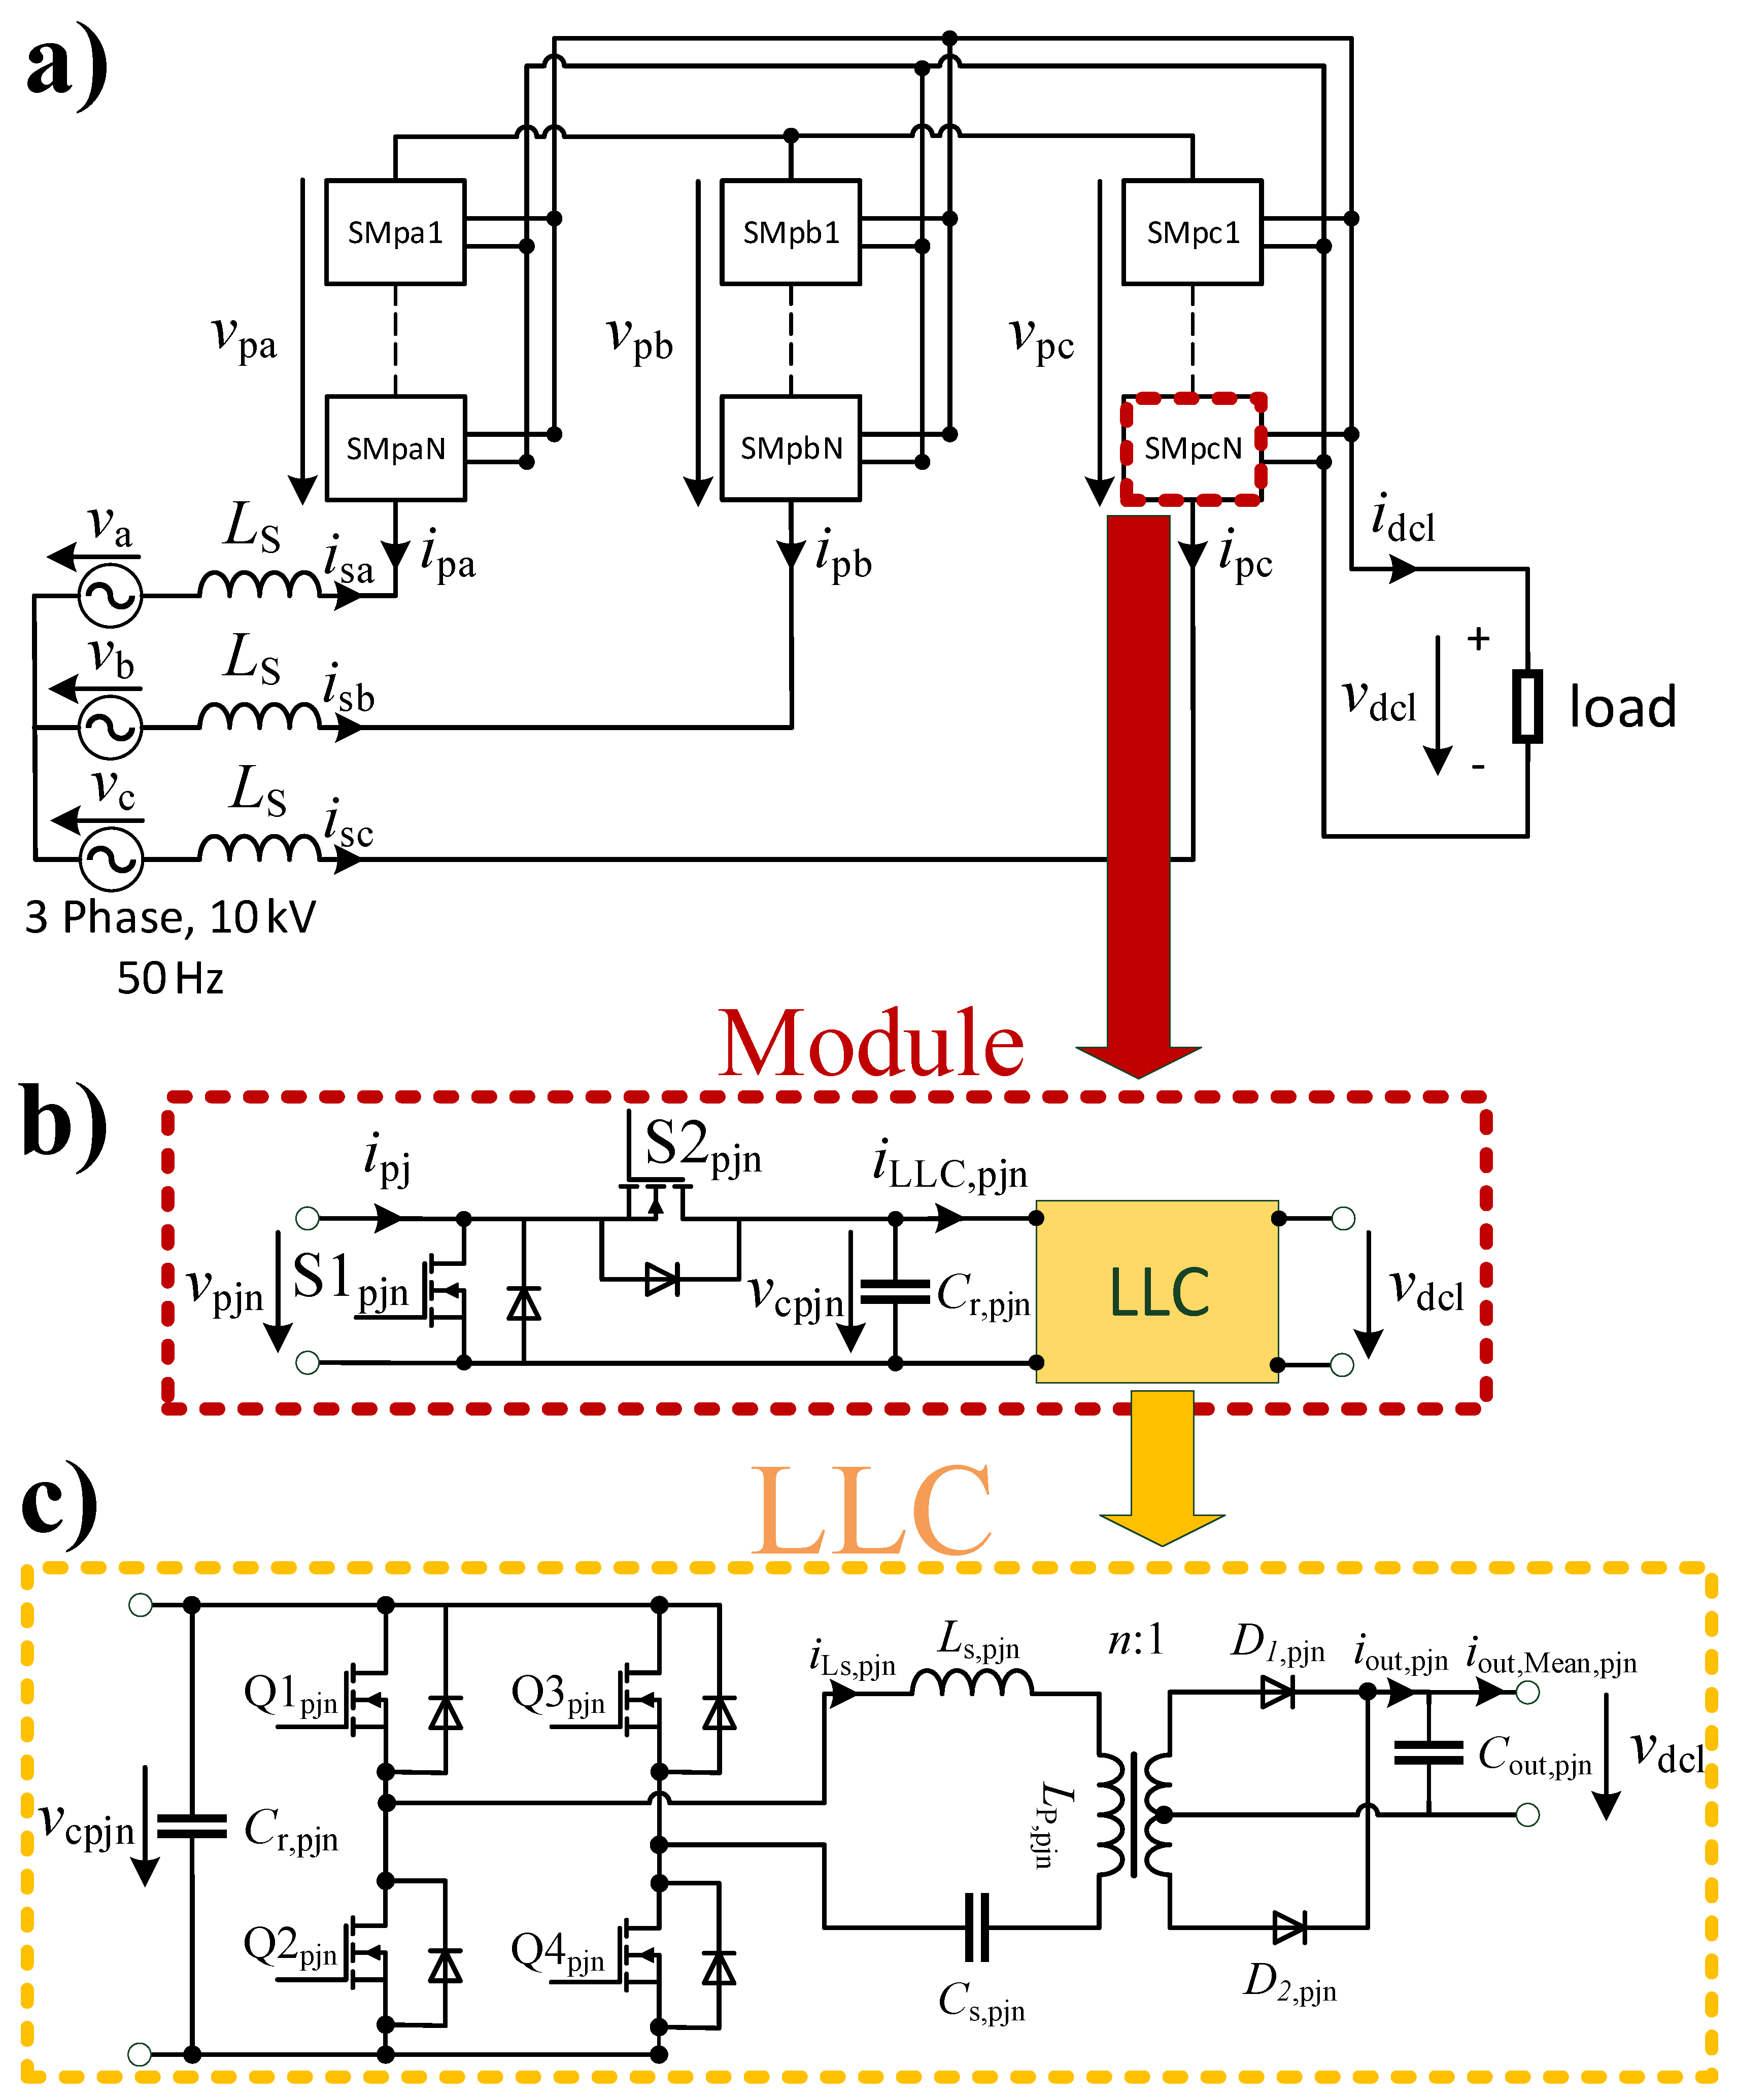 Fig 2: Topology of the investigated modular converter [1]. The converter has a very low THD and can provide controllable reactive power to the grid. The transformers of the LLCs provide the required galvanic isolation. 